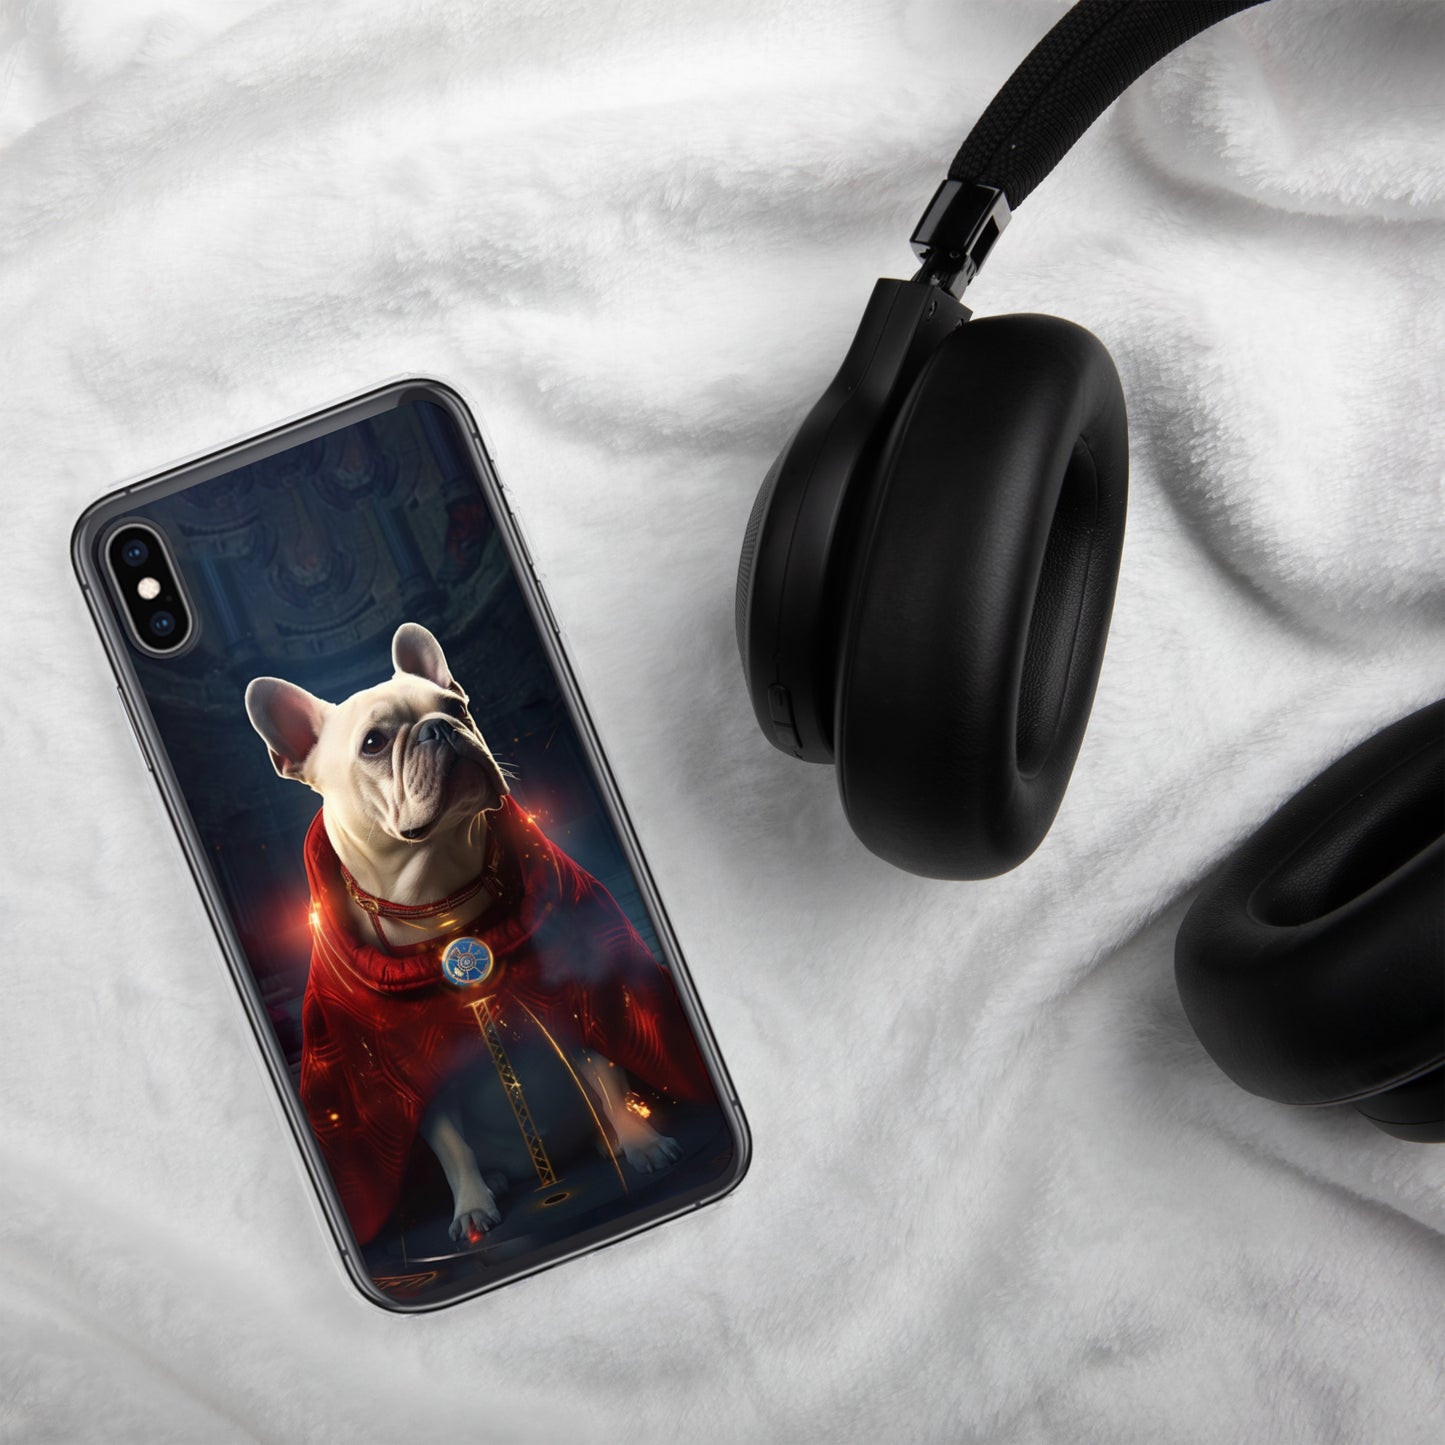 Frenchie Fashion iPhone Case - Stylish Protection for your Device